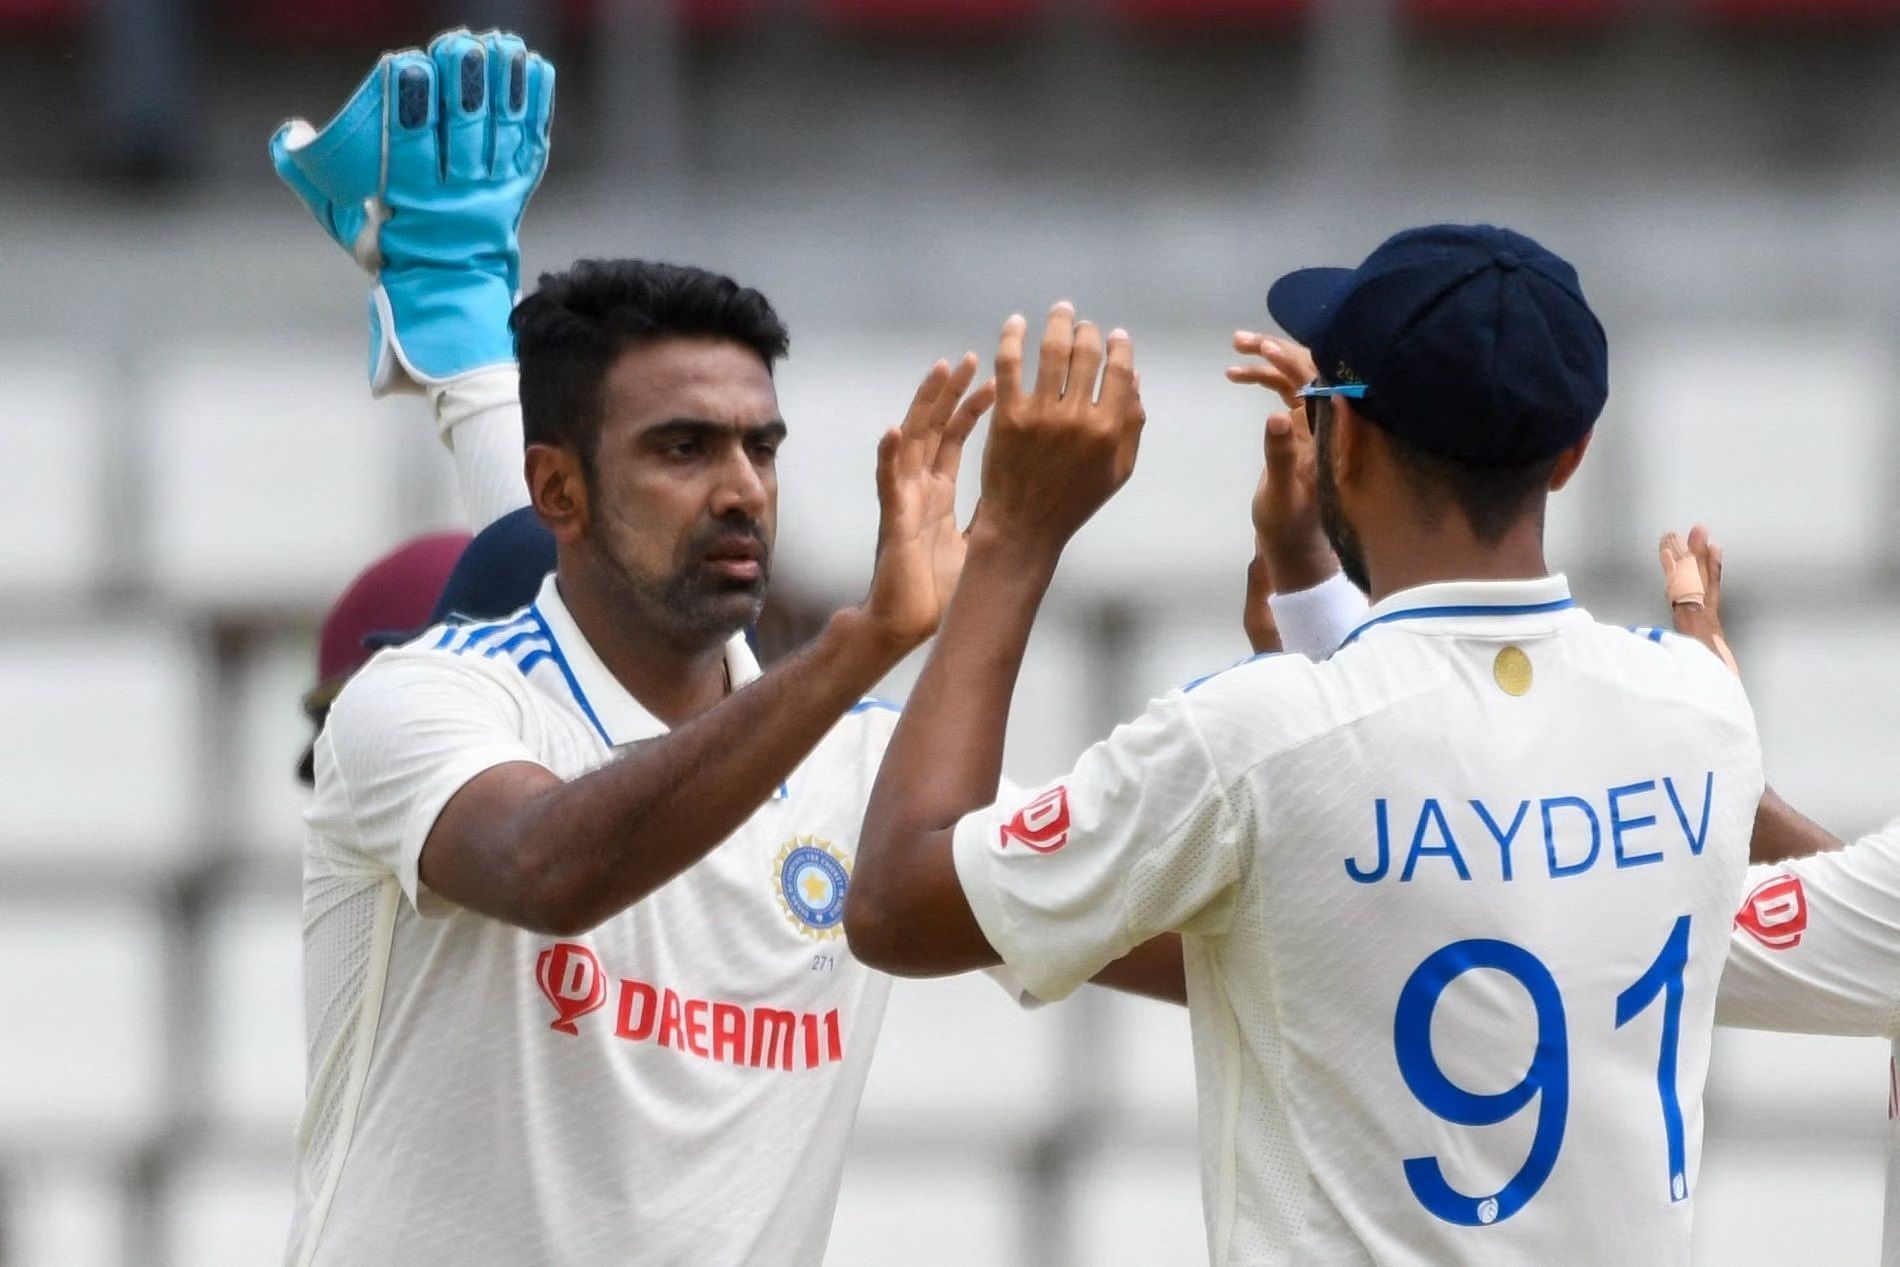 Ravichandran Ashwin picked up 12 wickets in the first Test. [P/C: BCCI]